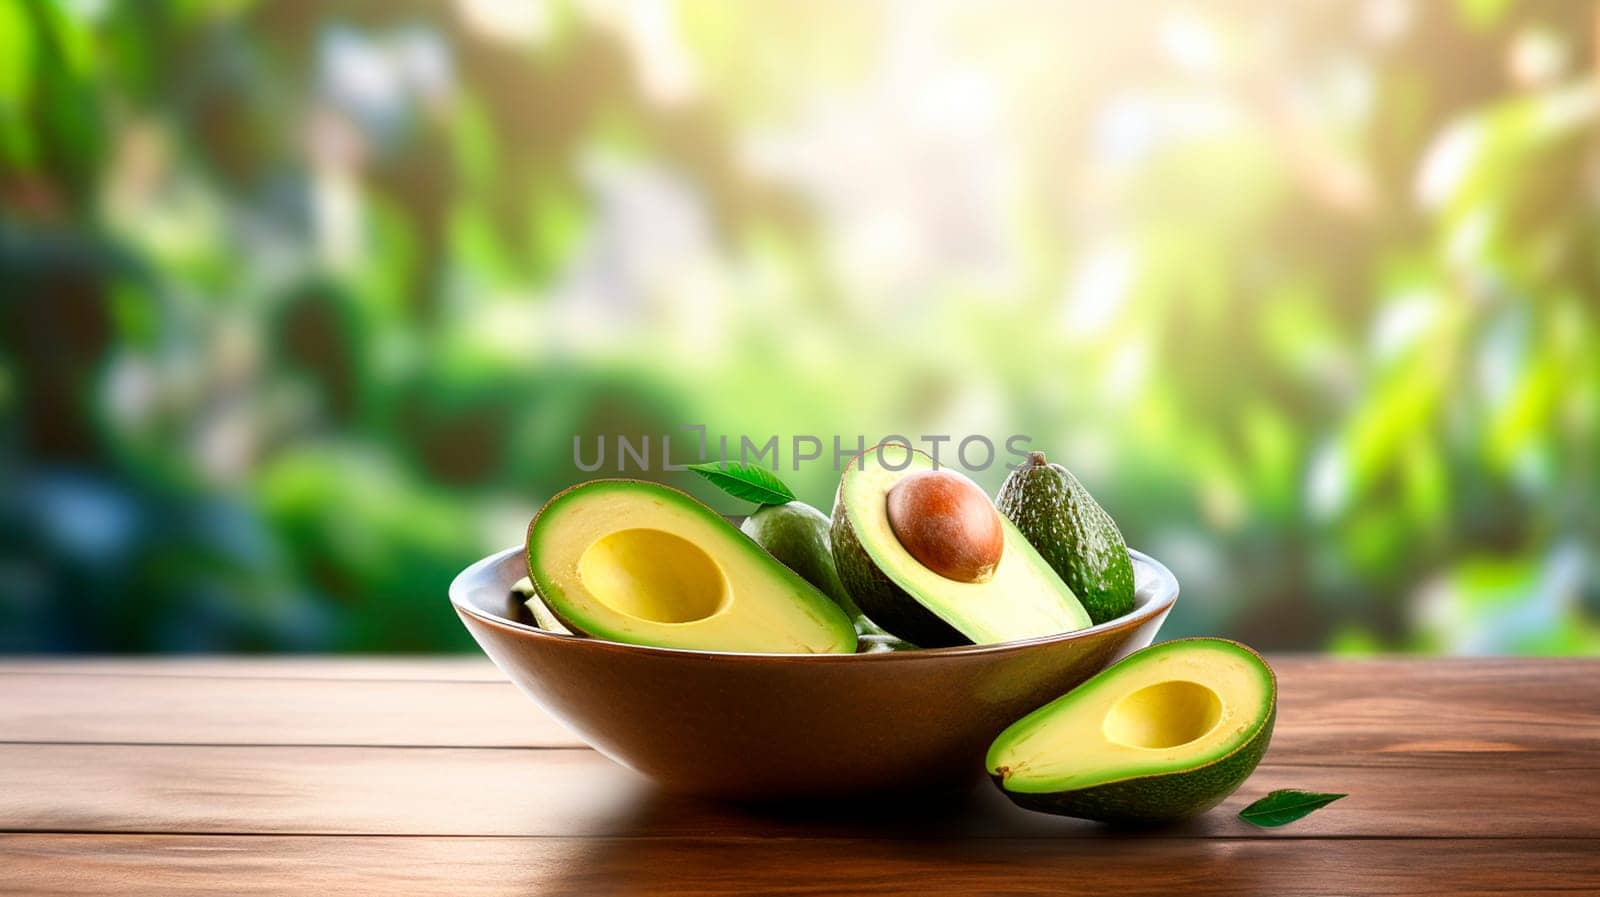 Avocado harvest in a bowl on a garden background. Selective focus. Food.